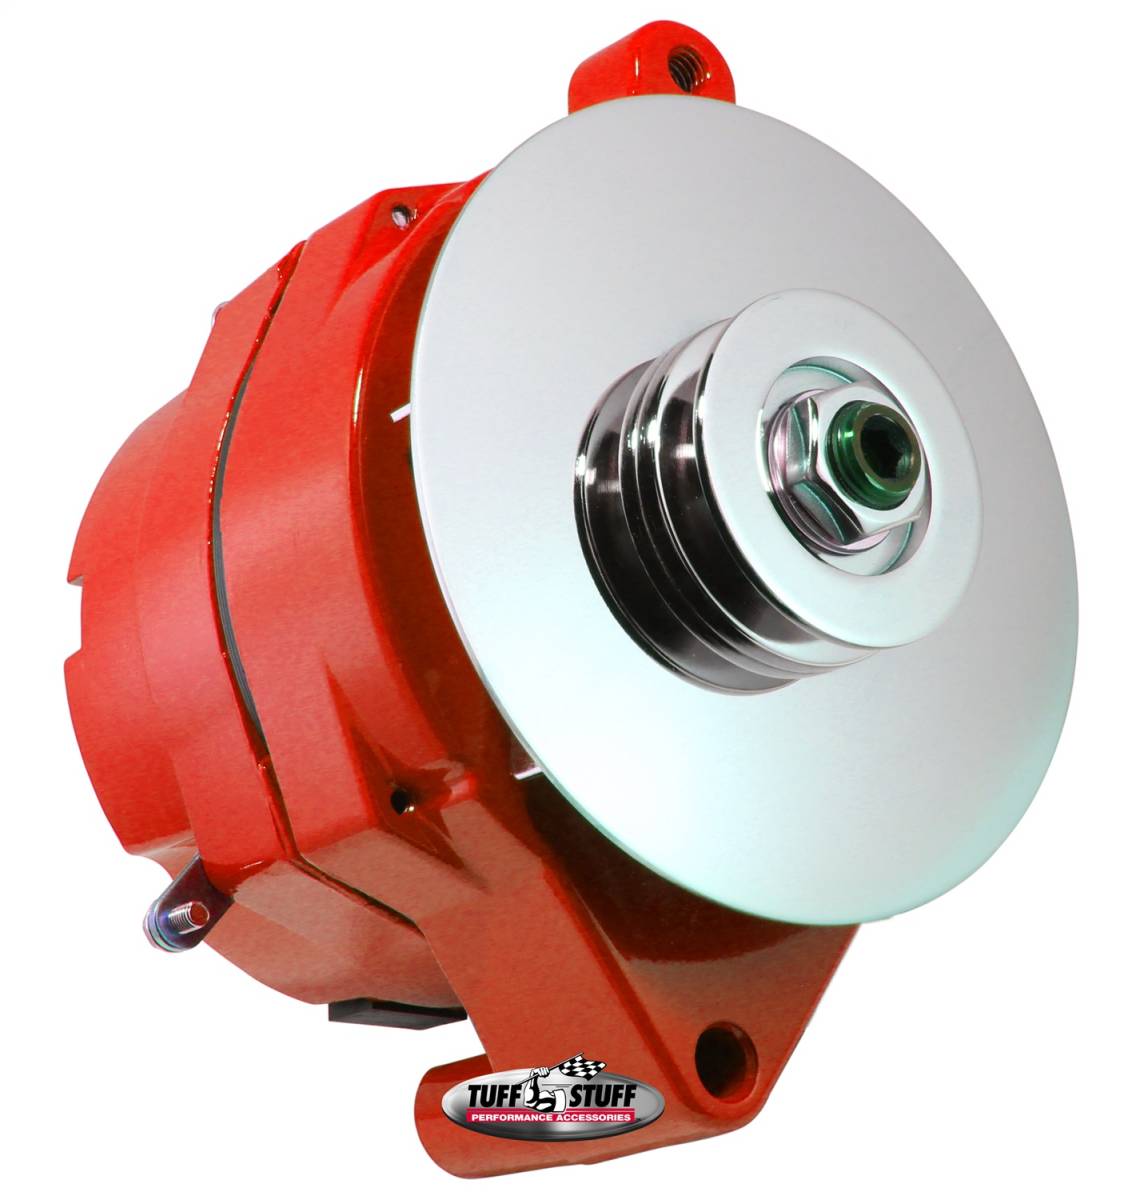 Tuff Stuff Performance - Alternator 100 AMP Smooth Back 1 Wire 1 Grove Pulley Red Powdercoat w/Chrome Accents 7068RFRED